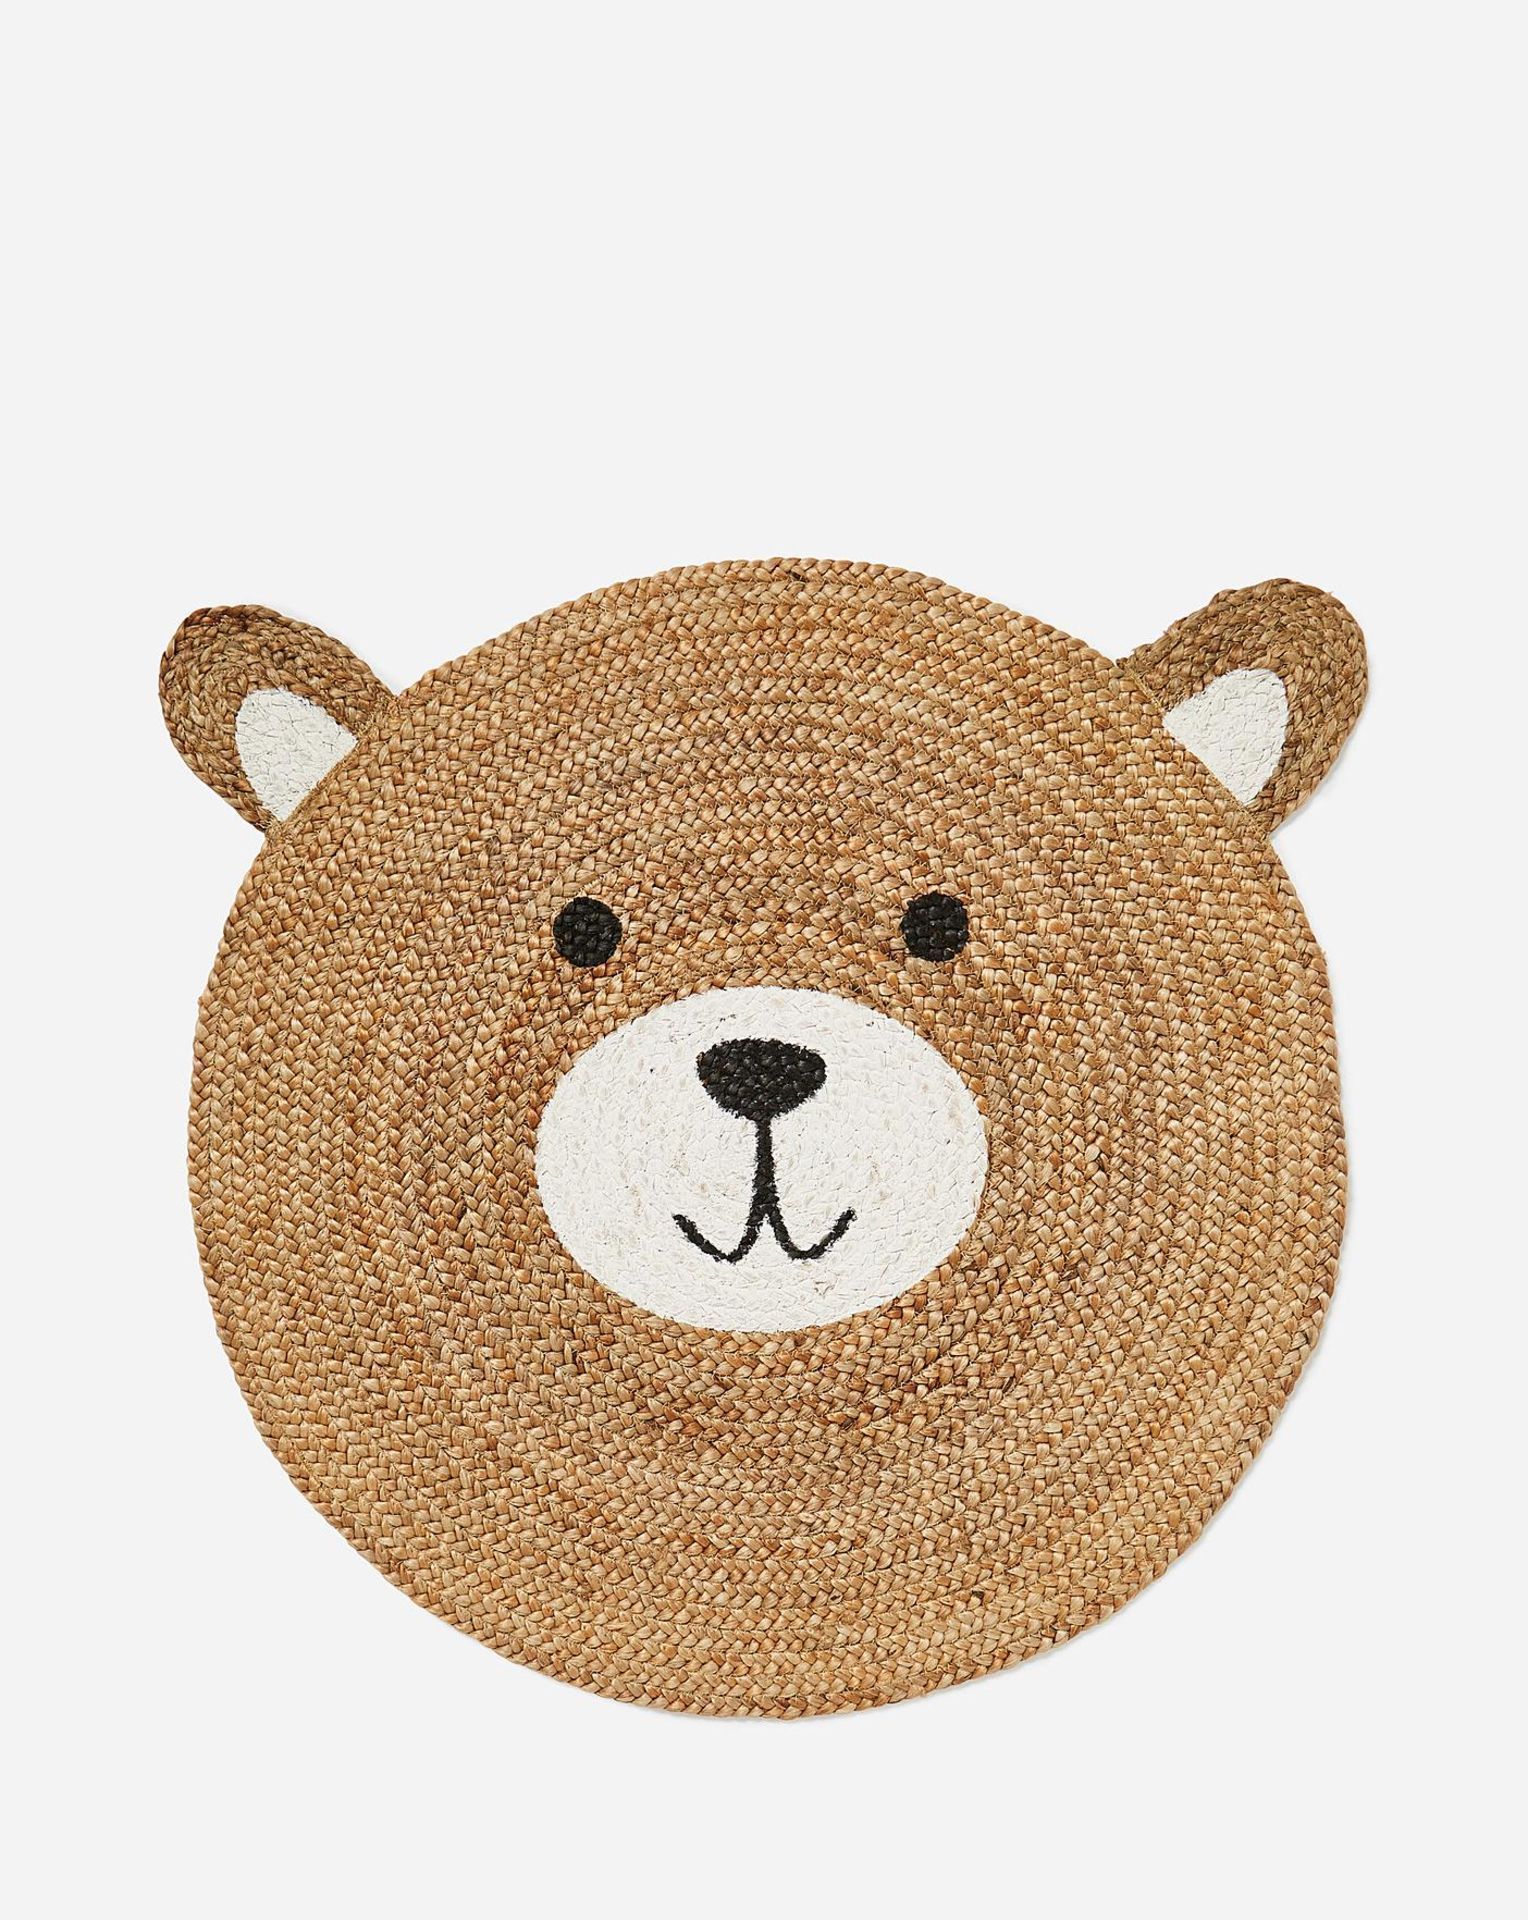 3 x BRAND NEW Bear Rug. RRP £88 EACH. Bring light to your little one's bedroom with this Bear Rug. - Image 3 of 3